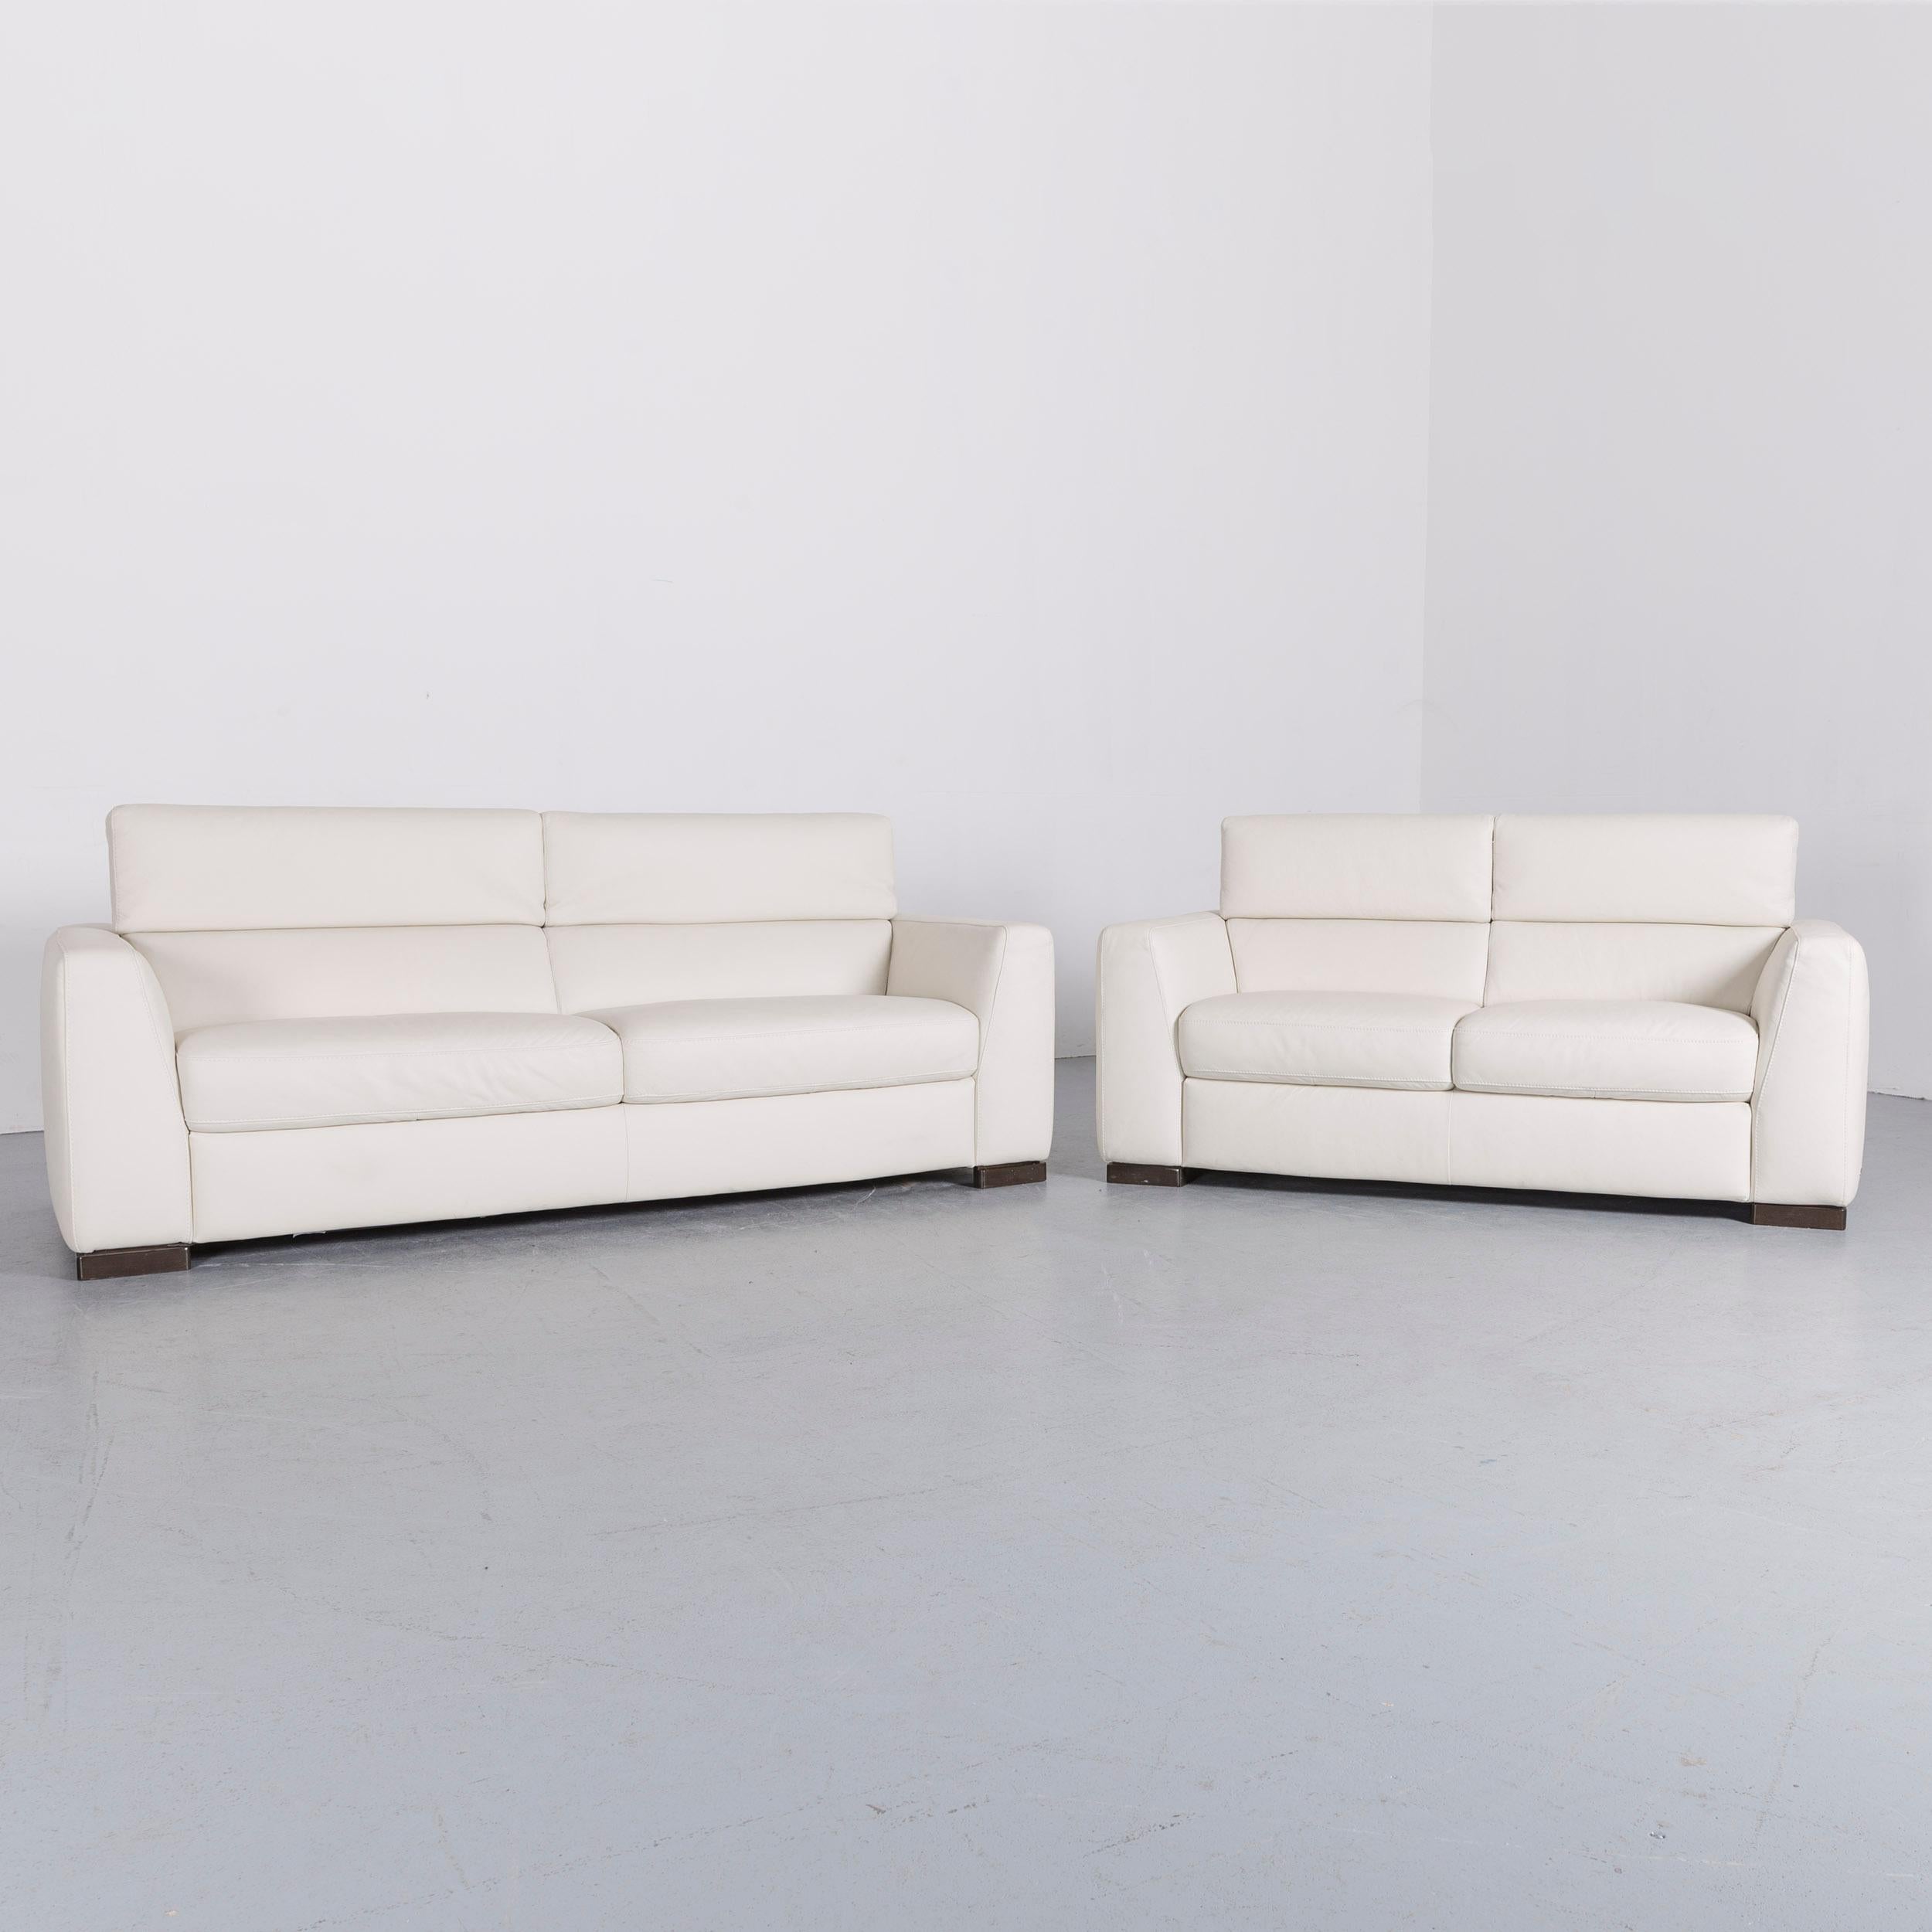 We bring to you an Italsofa designer leather sofa set crème white modern two-seat three-seat couch.